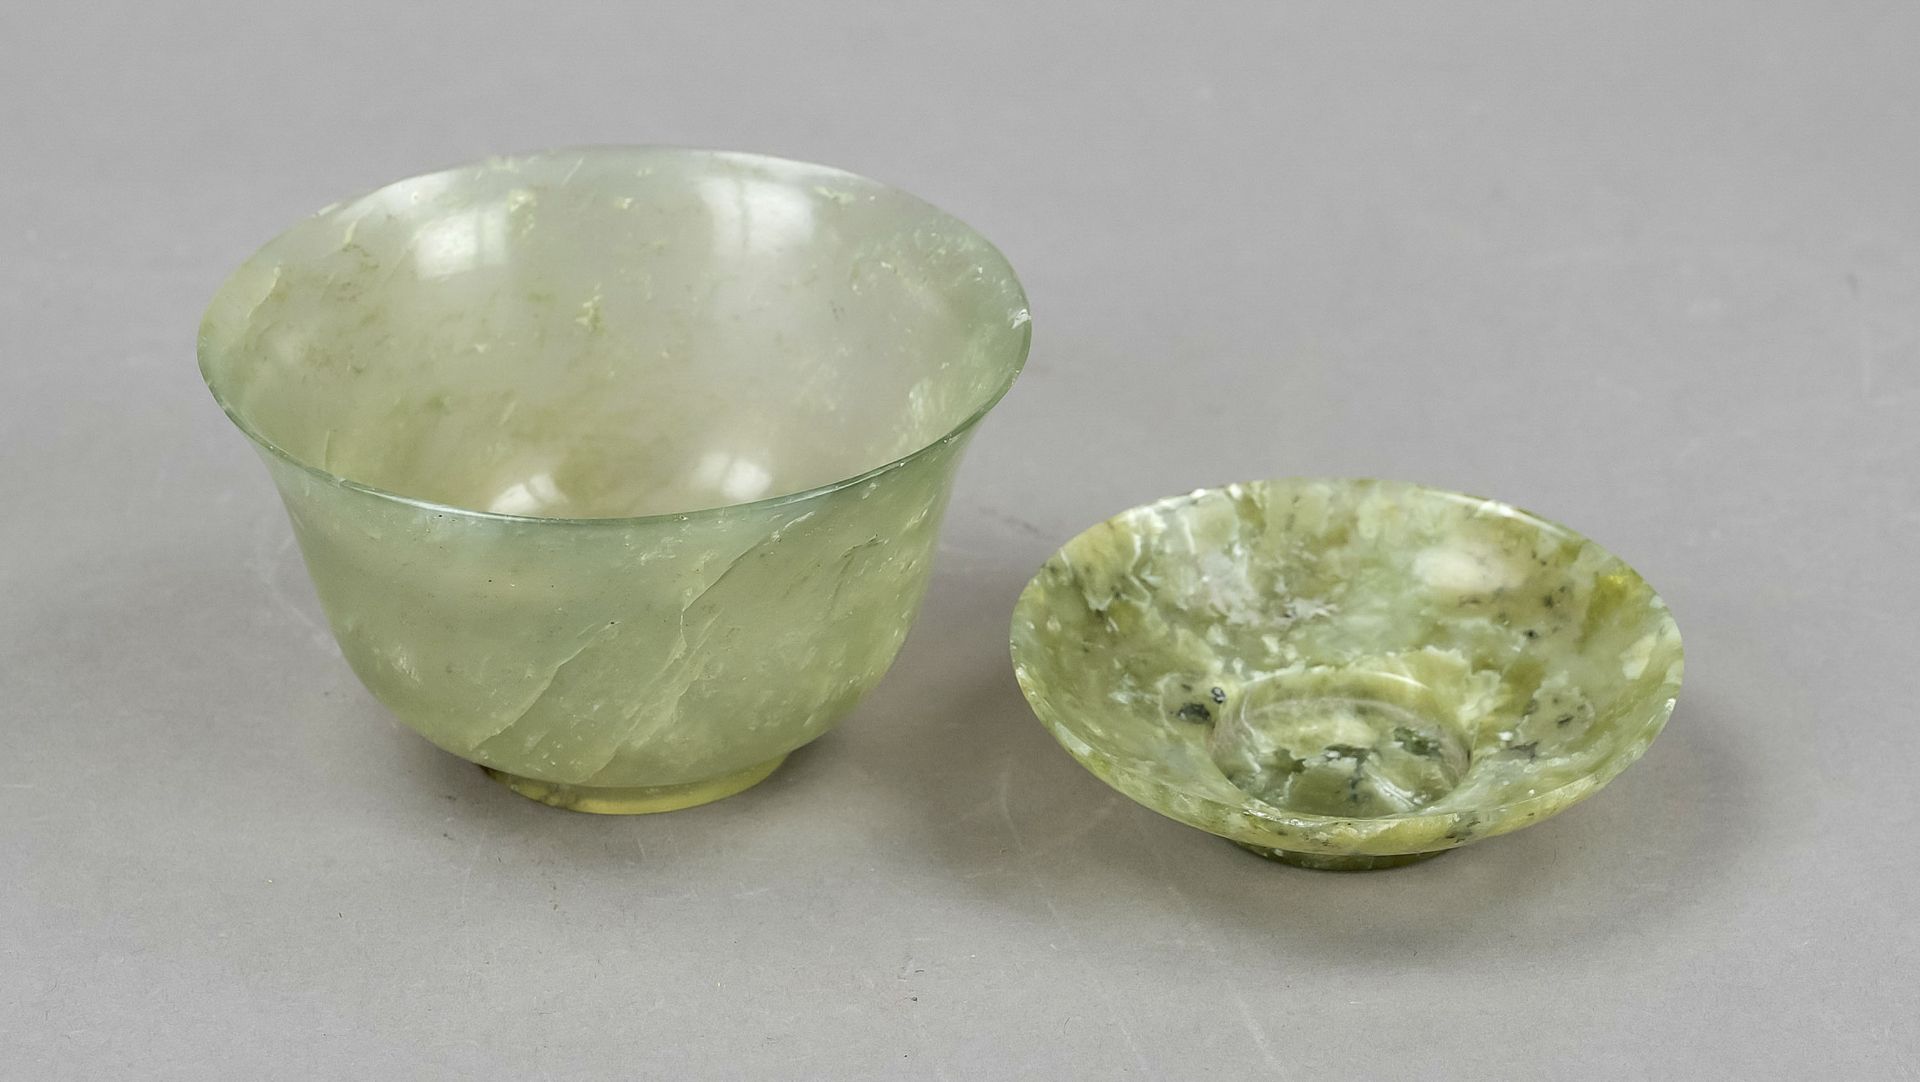 Jadeite lidded bowl, China, 19th/20th century, jade tea bowl with lid brought to translucency, d - Image 2 of 2